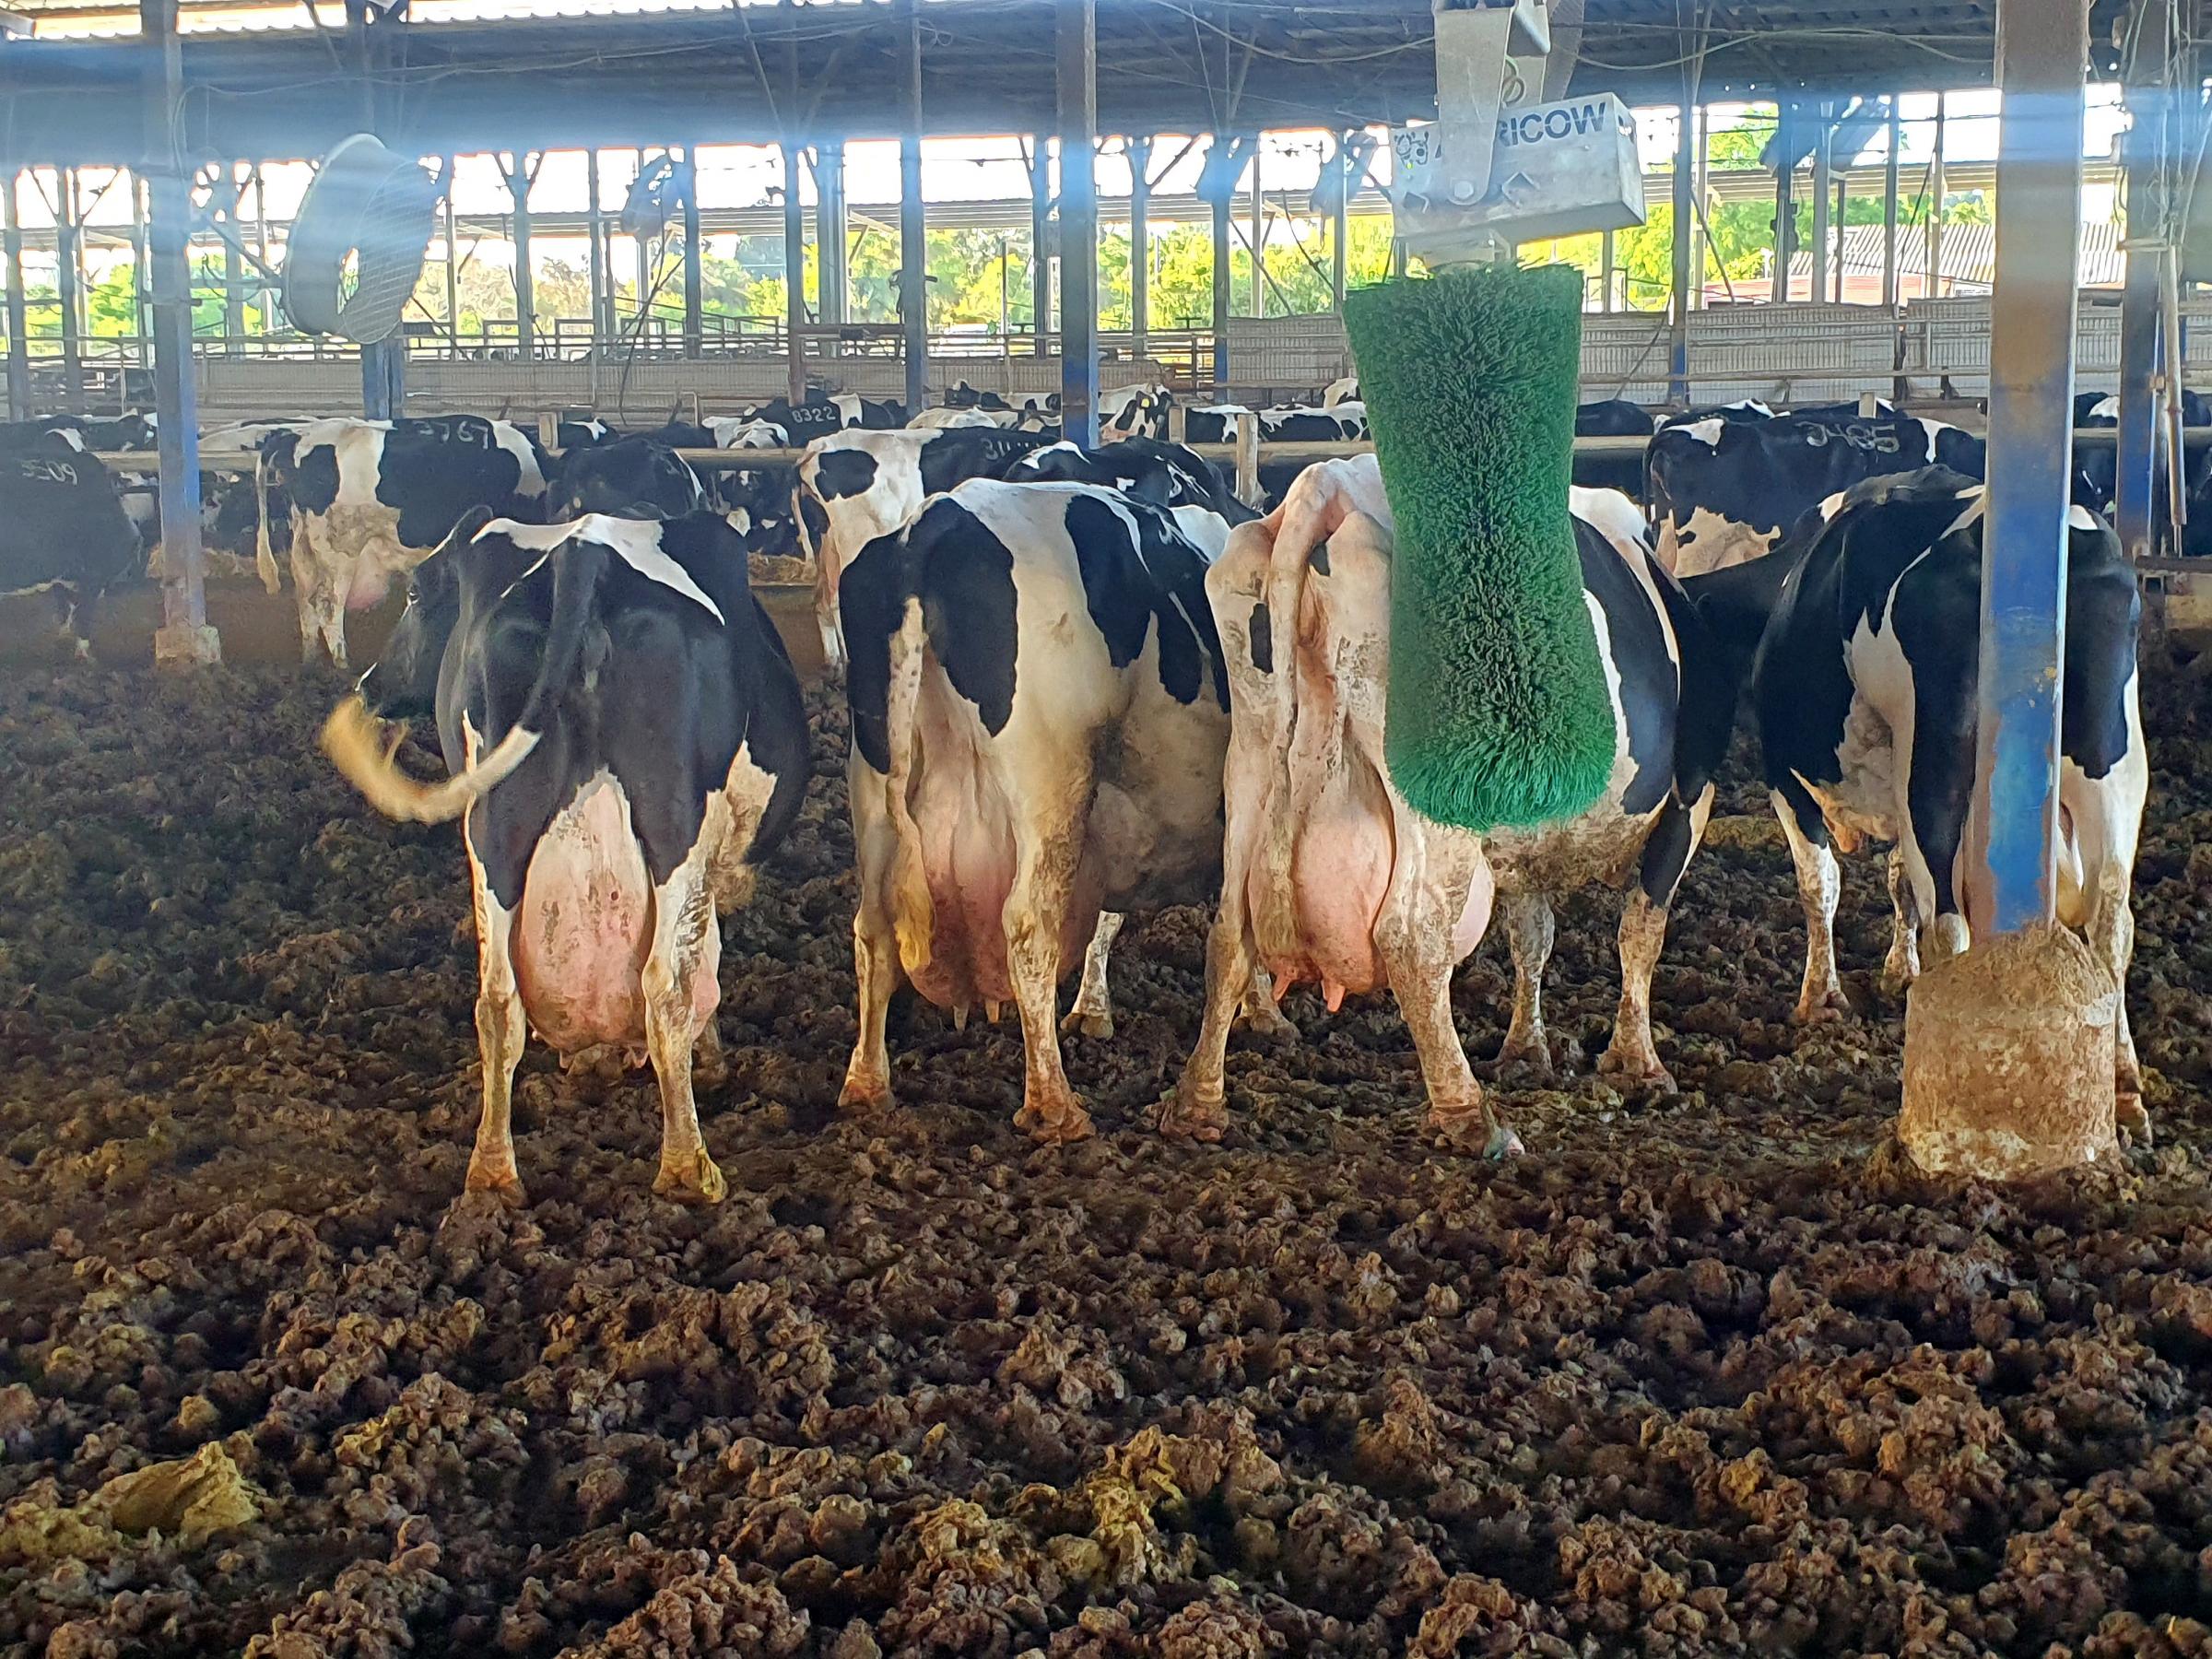 Cows give an average yield of 12,500 litres per 305-day lactaction.